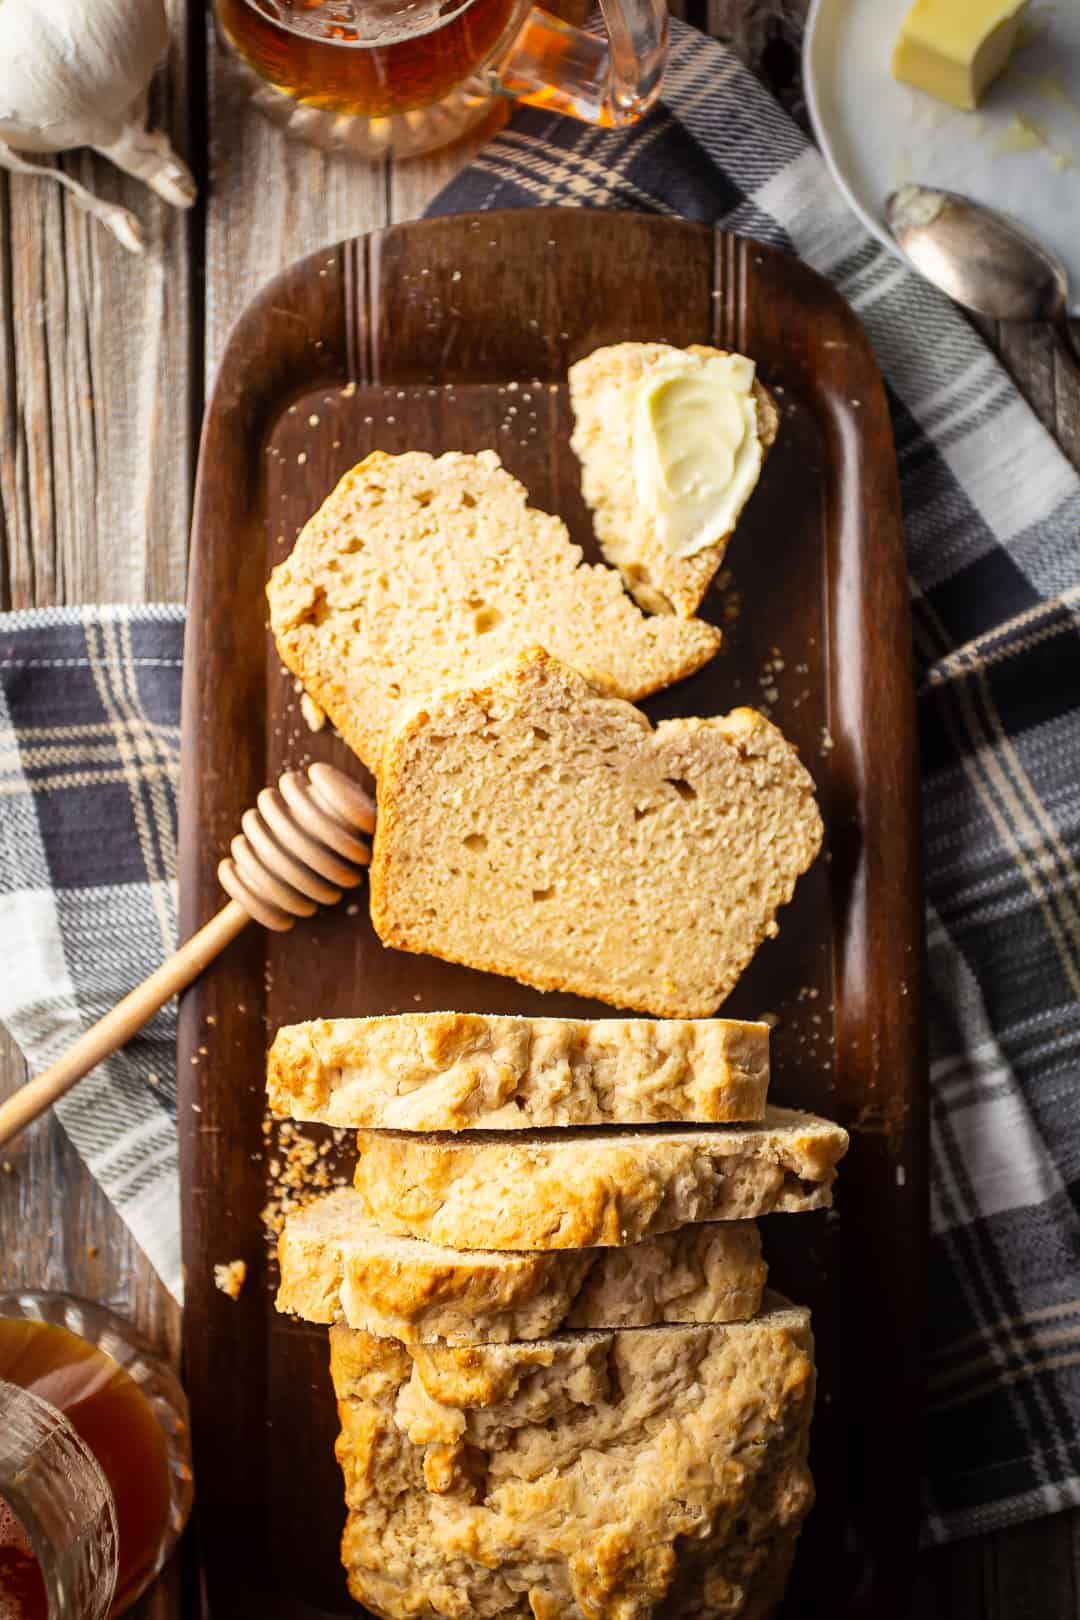 Recipe for beer bread, prepared, sliced, buttered, and served on a wood tray.